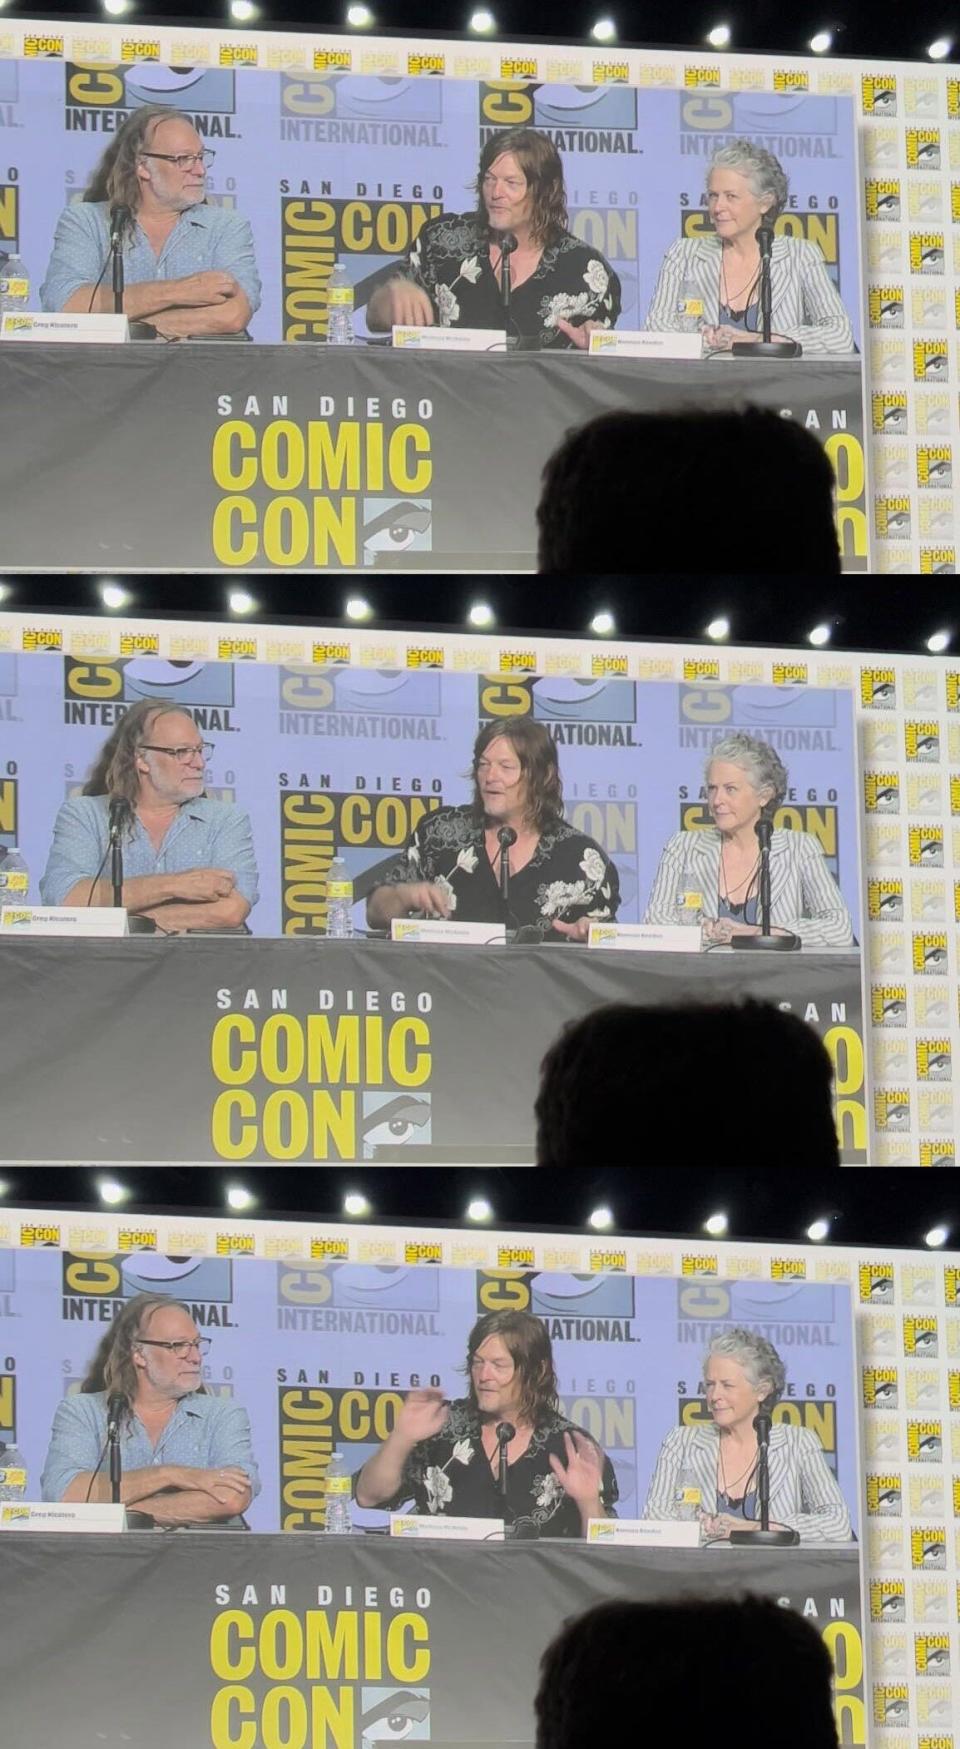 Melissa McBride's reactions when Norman Reedus said "the Carol/Daryl story isn't over yet" during the "TWD" panel at SDCC.